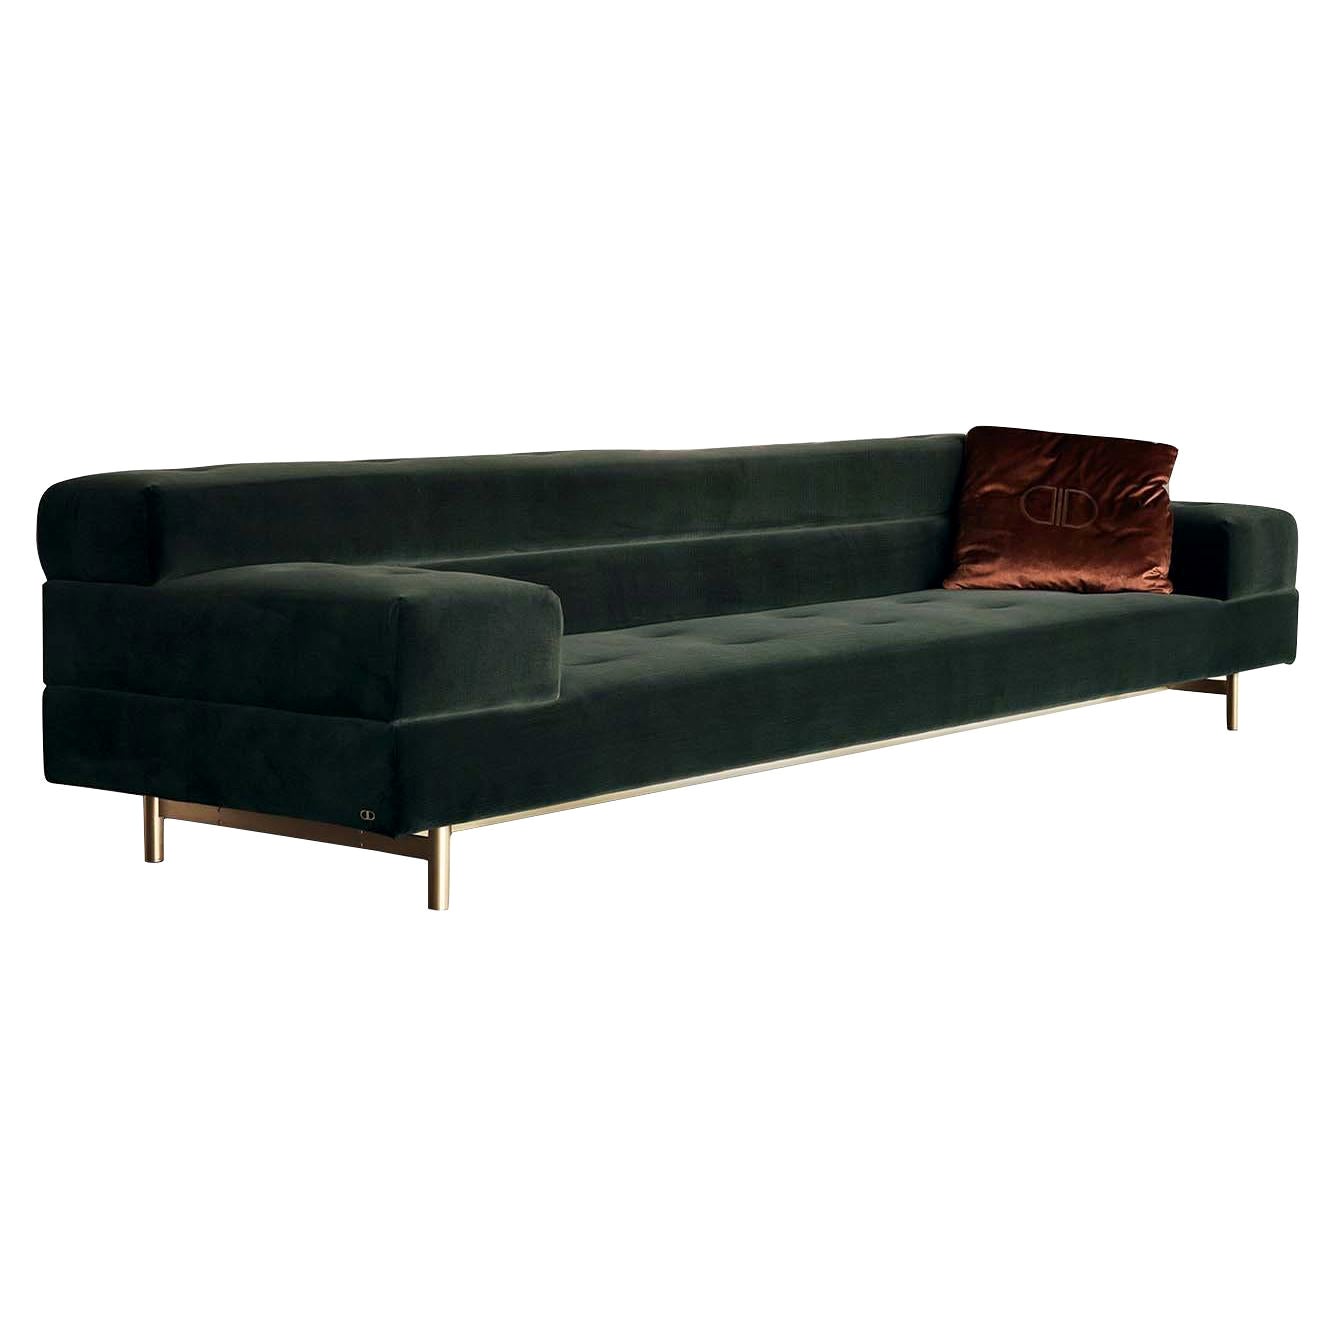 Lifestyle Green Sofa For Sale